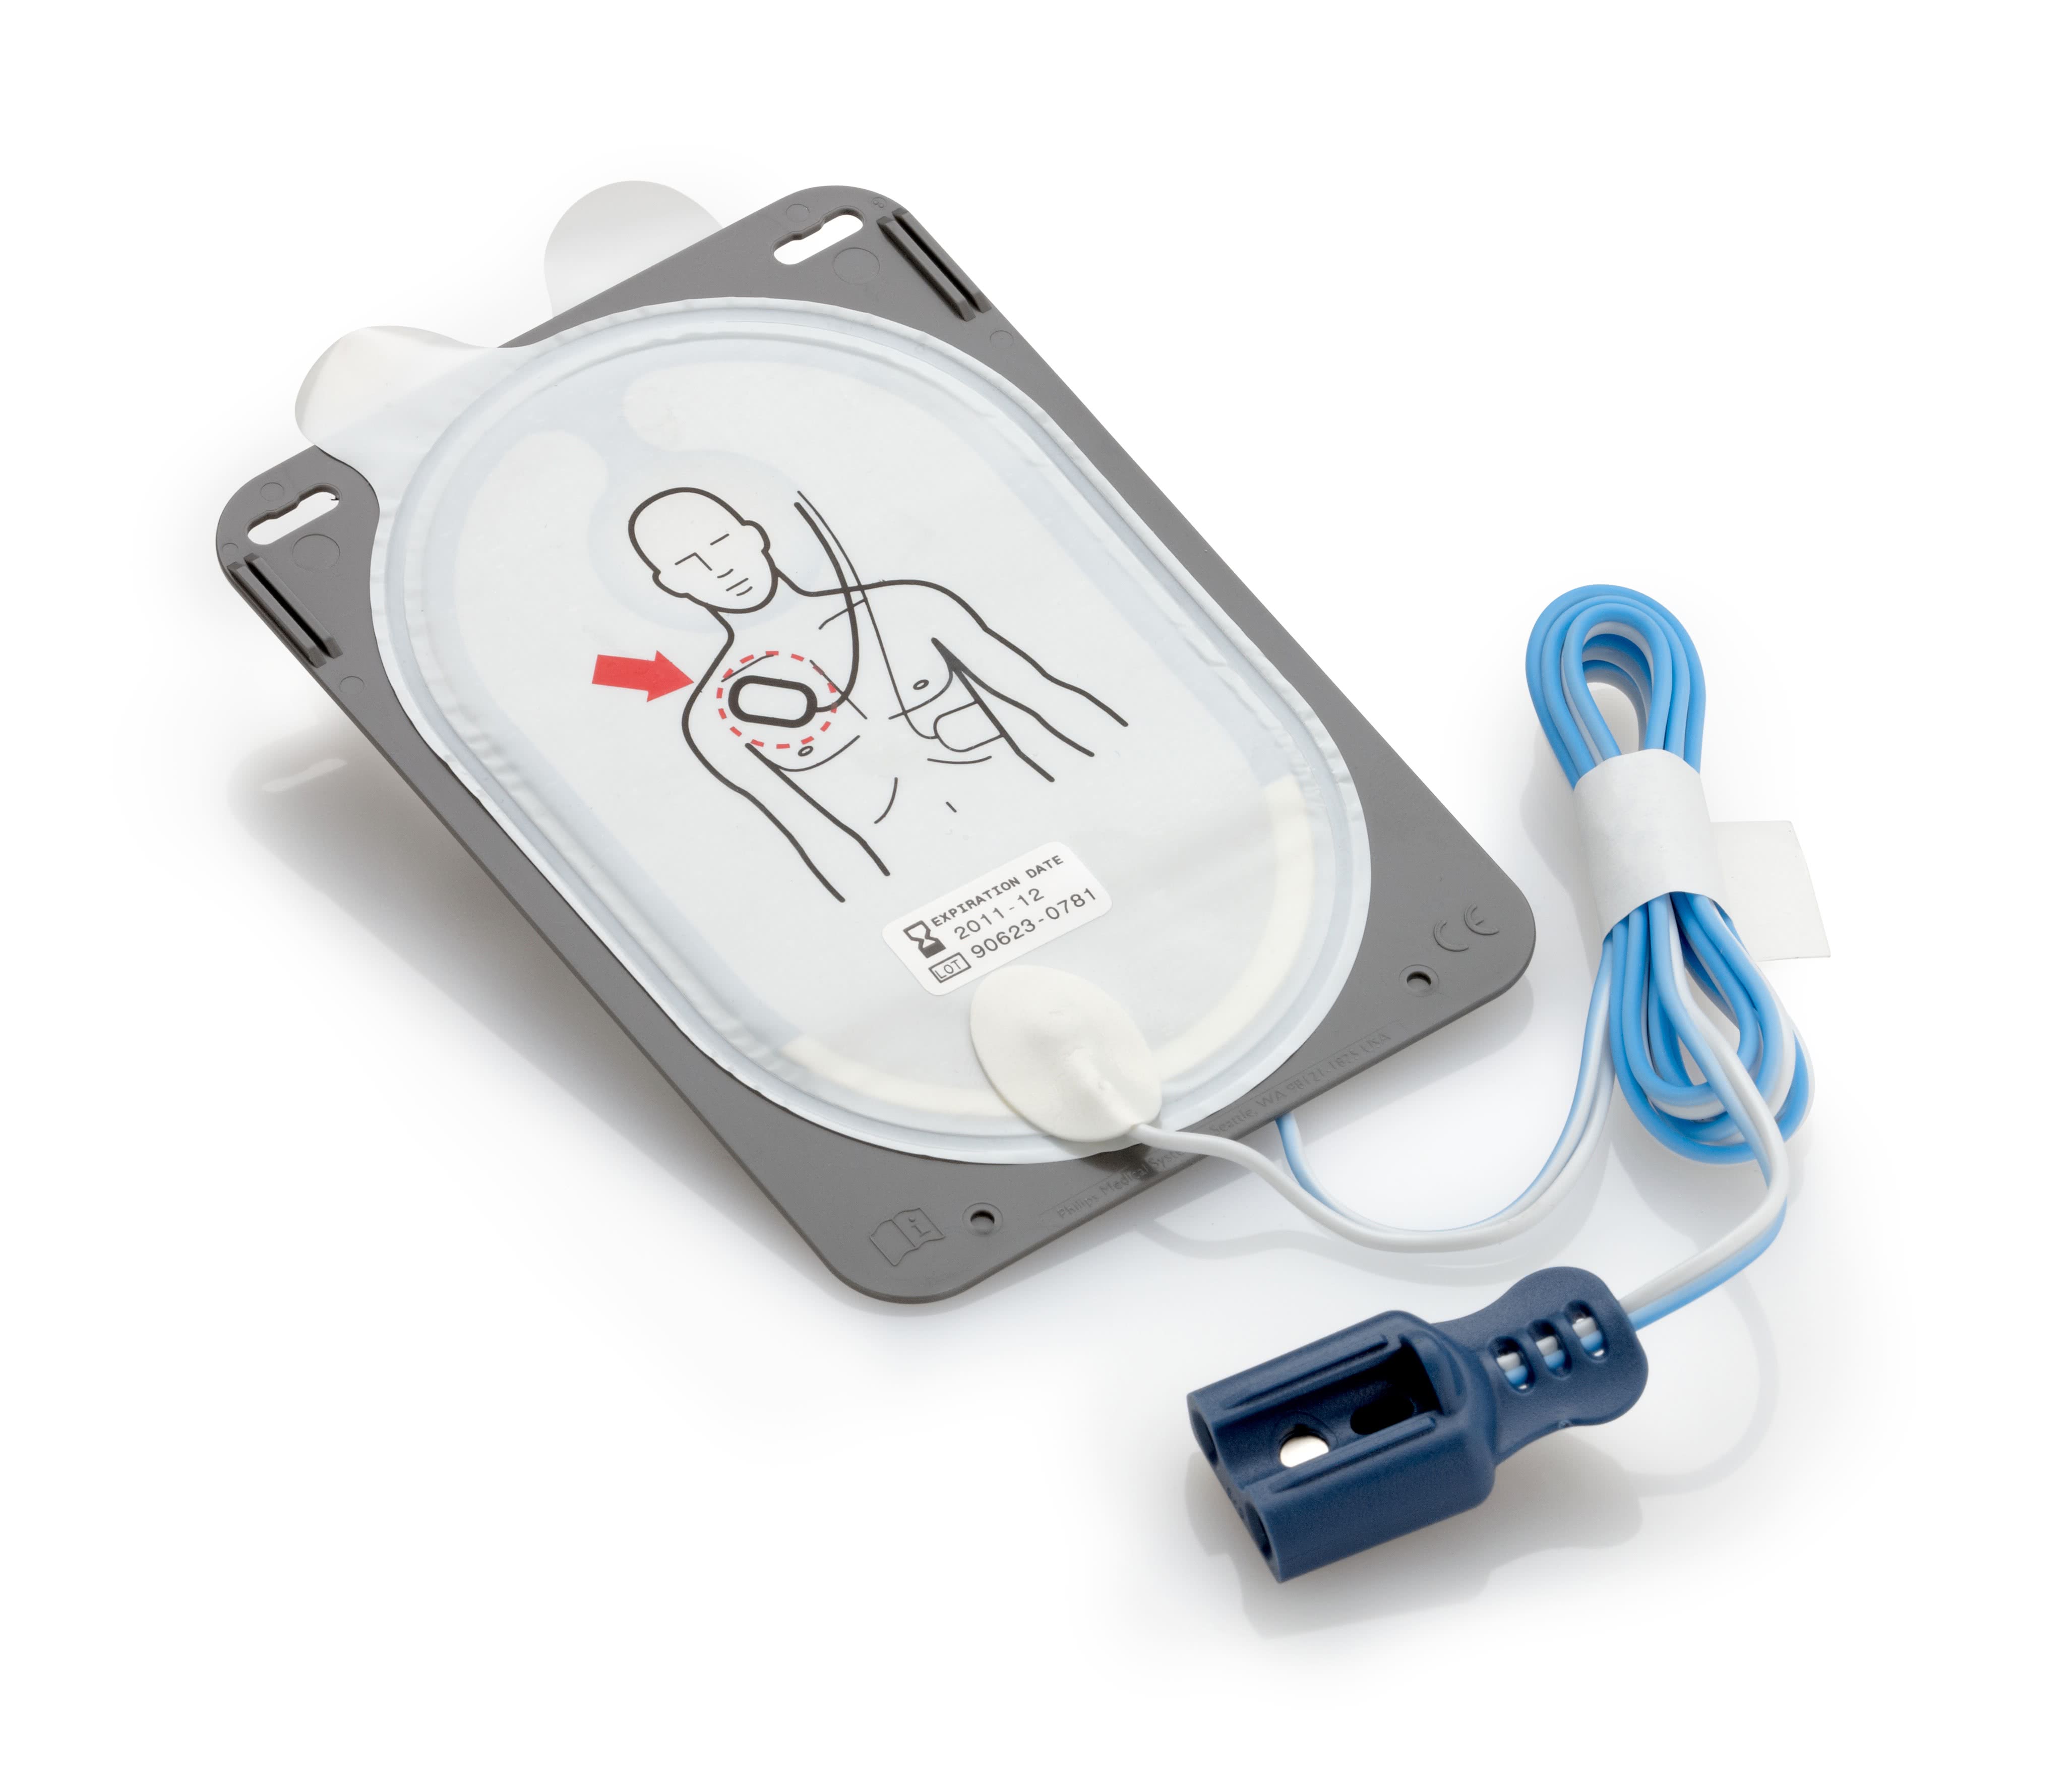 Frx AED with wall mount case and child key image